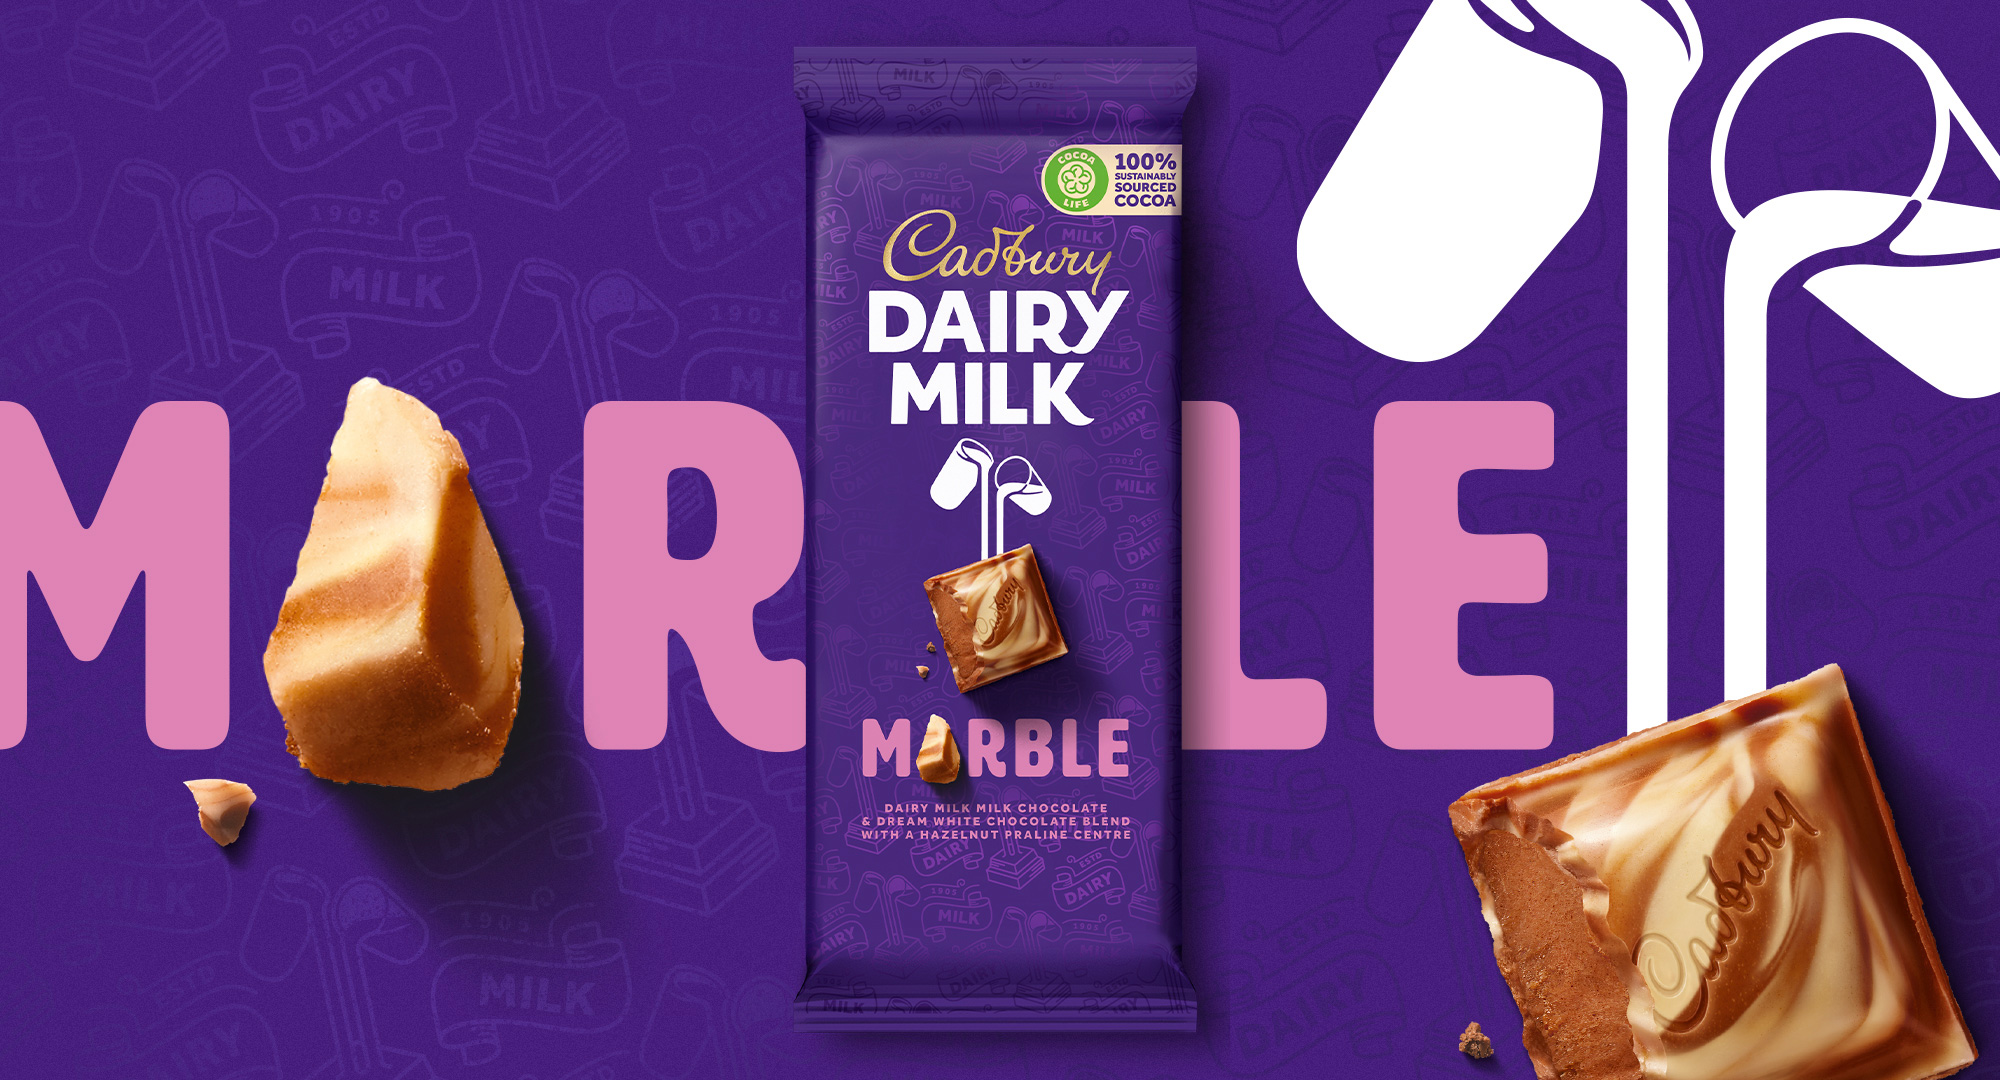 New Logo, Identity, and Packaging for Cadbury by Bulletproof